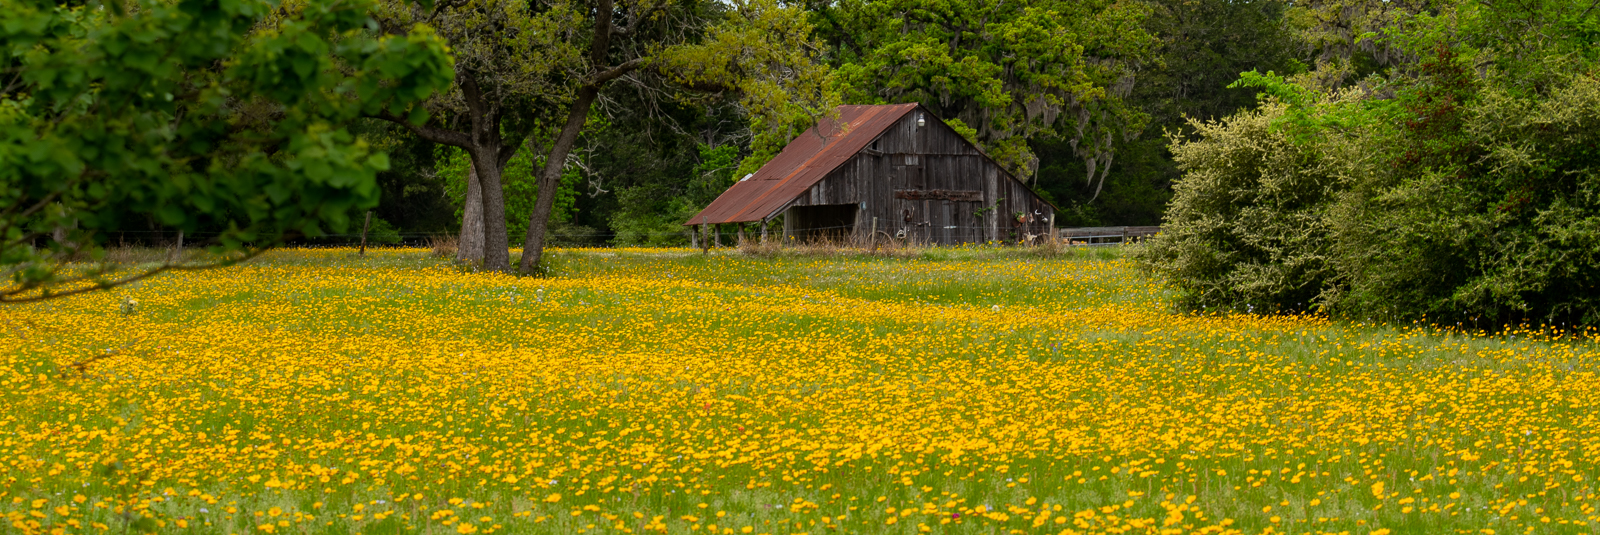 Old barn surrounded by a field of yellow flowers